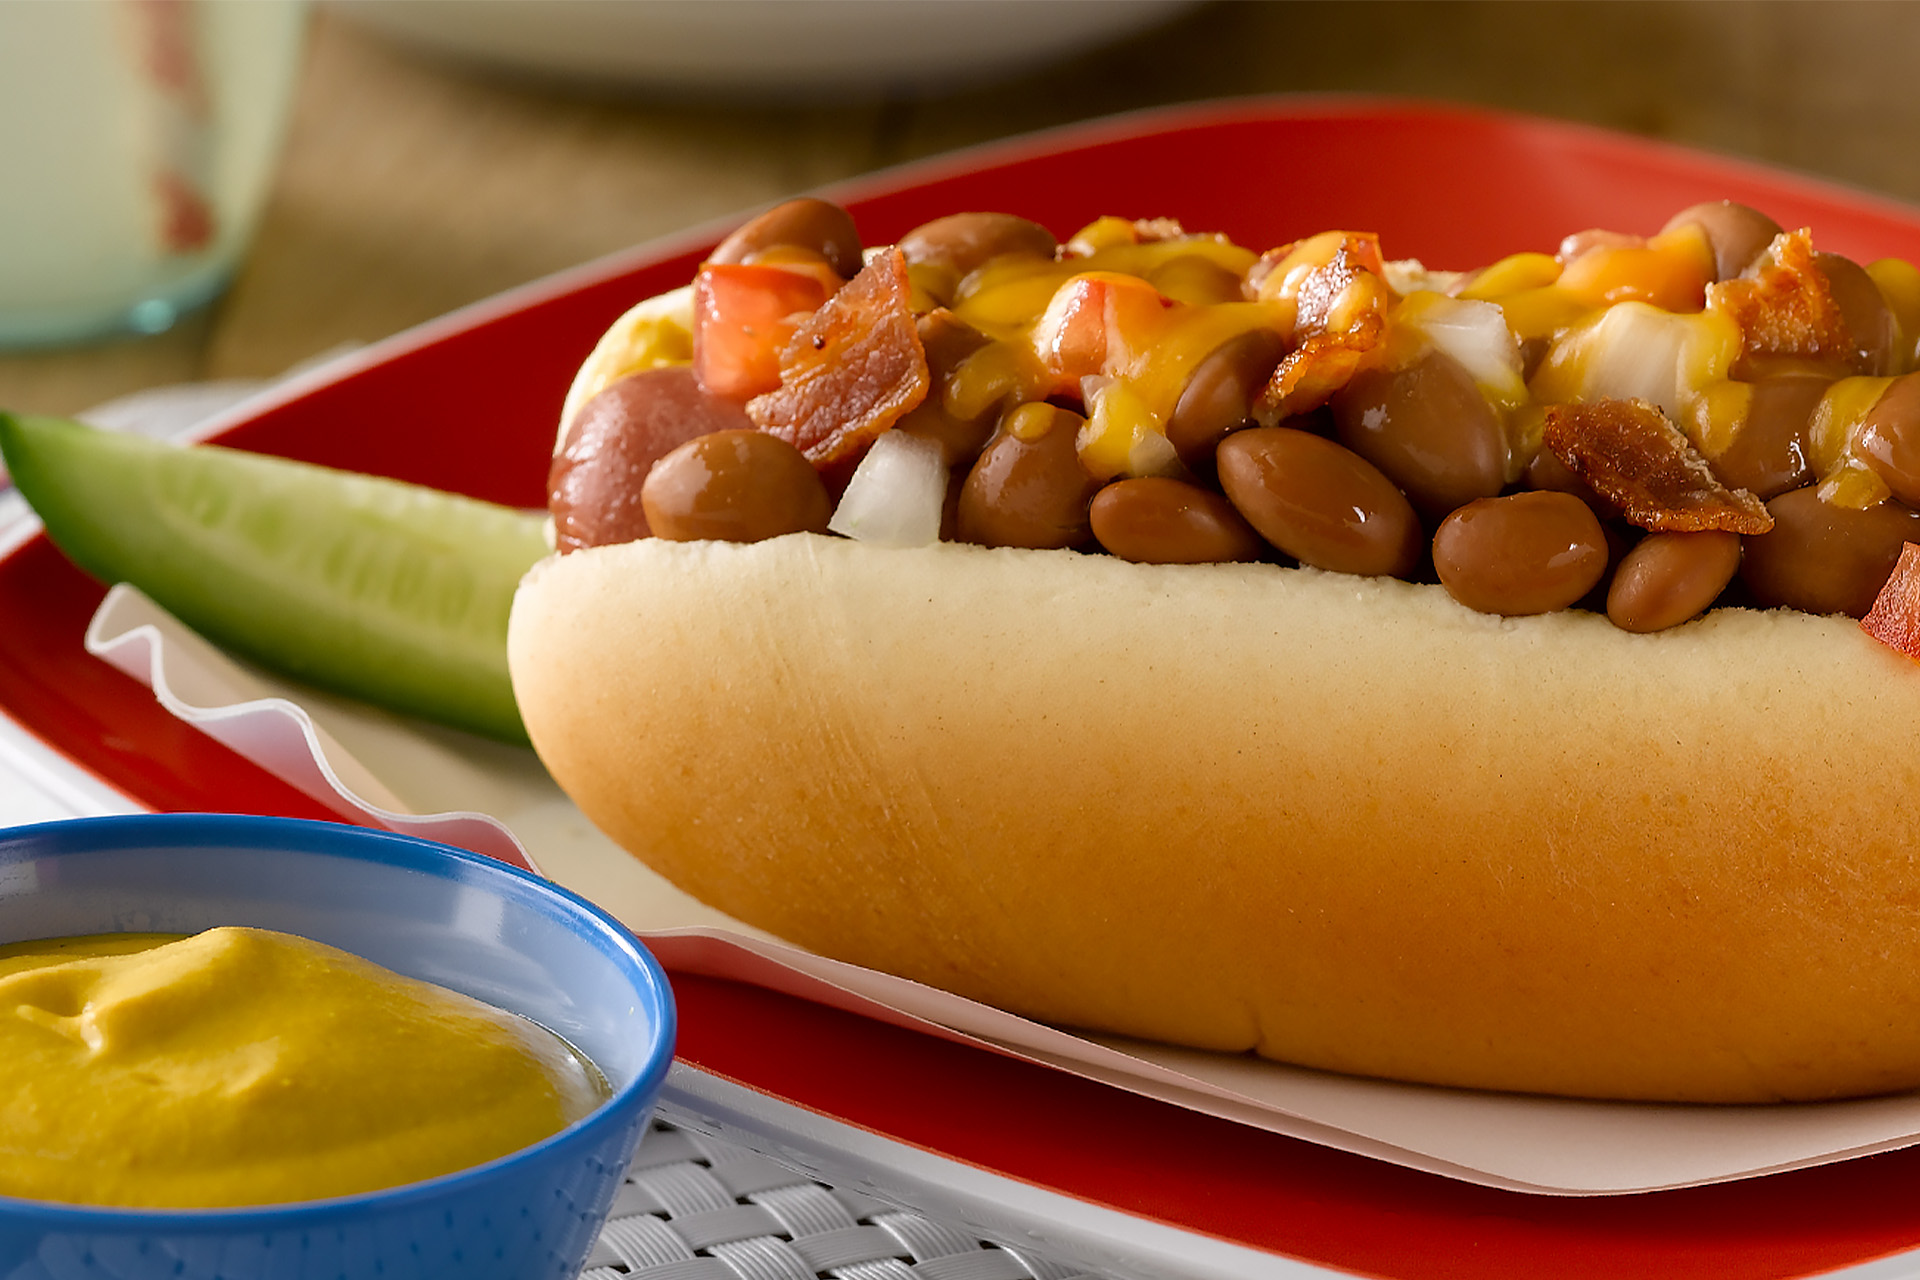 Close up of a cheddar chili dog with beans and bacon, with small bowl of mustard and pickle spear